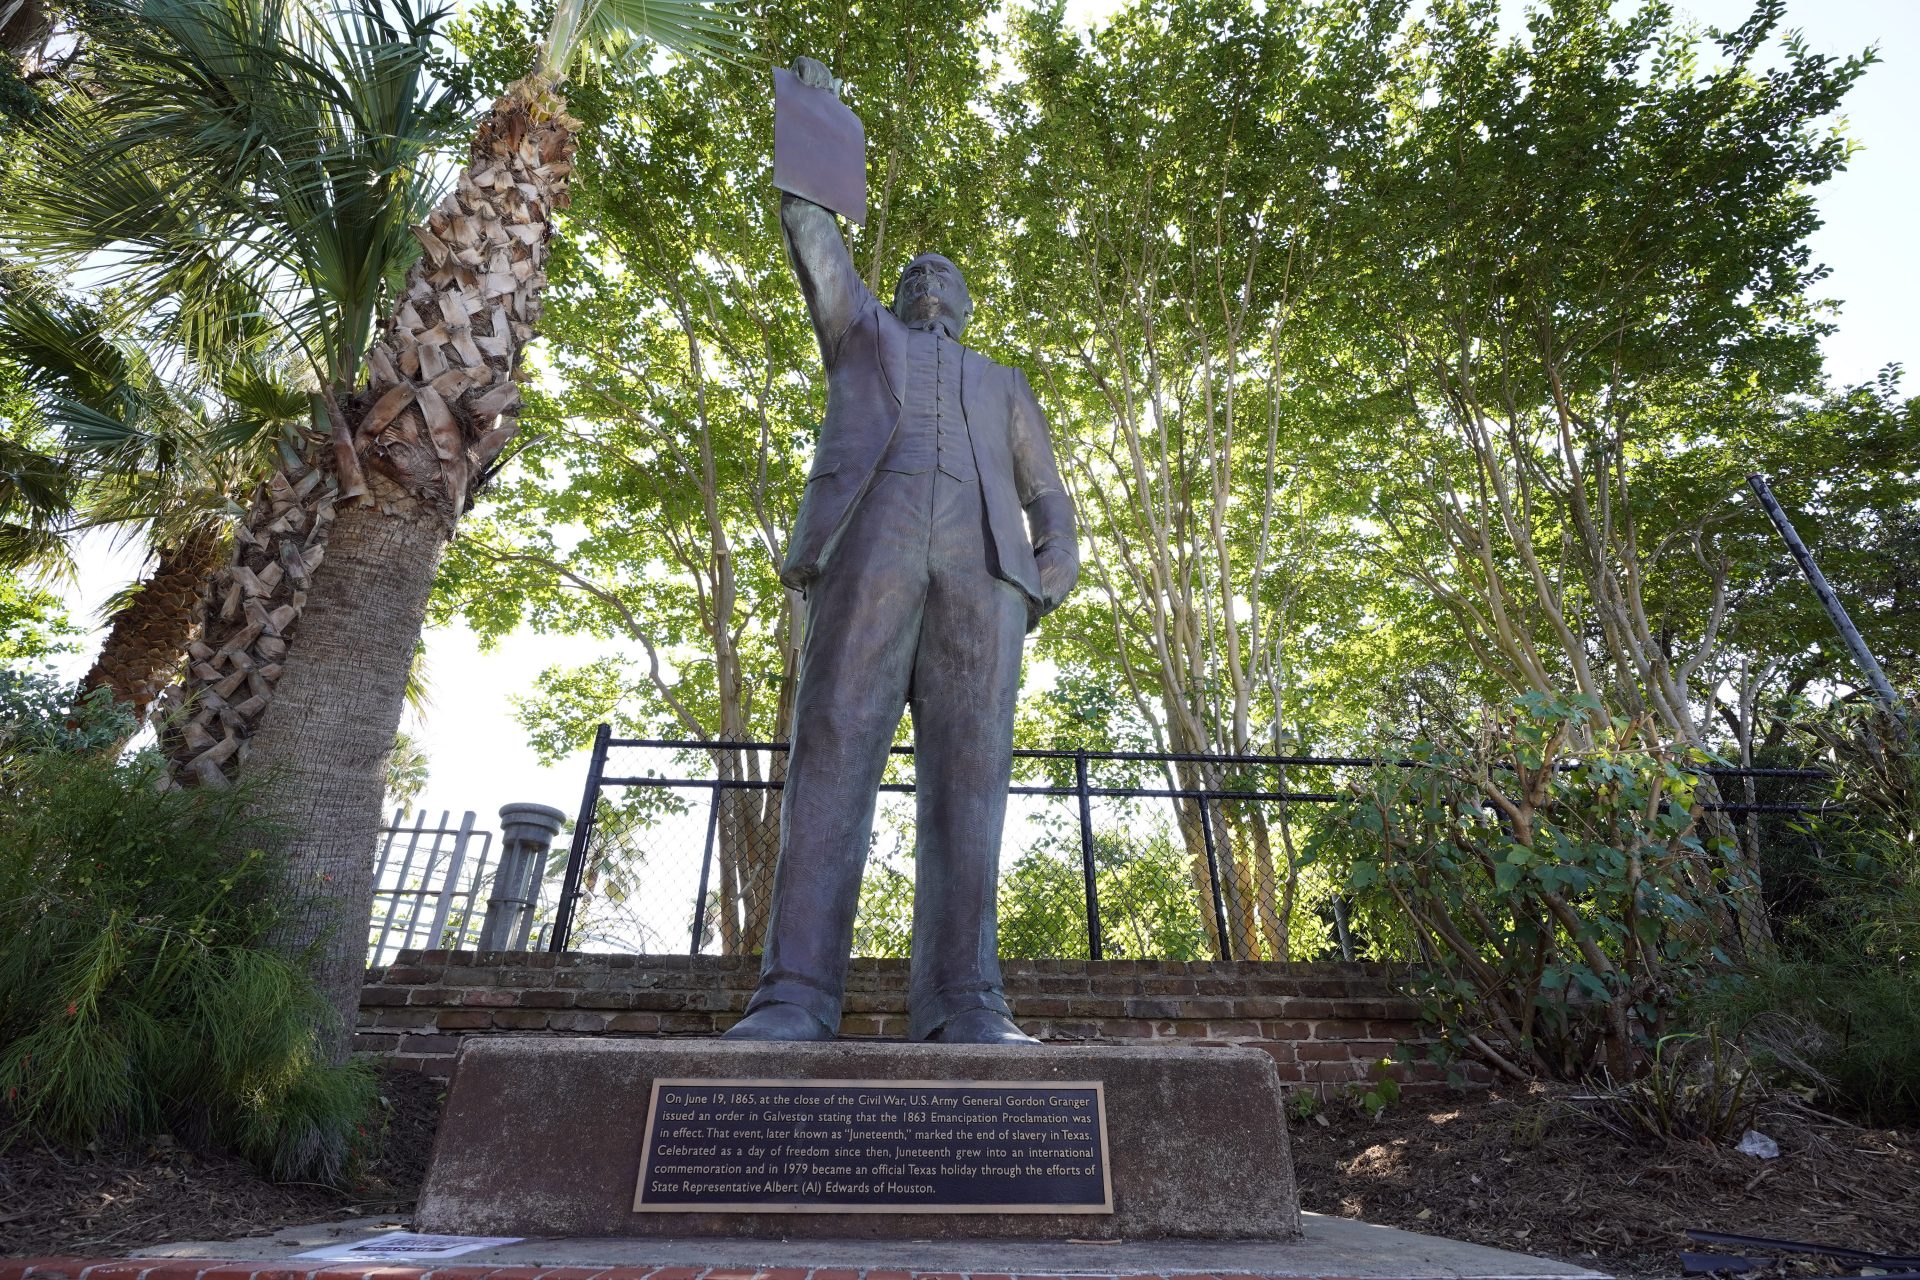 In this June 17, 2020, photo, a statue depicts a man holding the state law that made Juneteenth a state holiday in Galveston, Texas. The inscription on the statue reads "On June 19, 1865, at the close of the Civil War, U.S. Army General Gordon Granger issued an order in Galveston stating that the 1863 Emancipation Proclamation was in effect. That event, later known as "Juneteenth," marked the end of slavery in Texas. Celebrated as a day of freedom since then, Juneteenth grew into an international commemoration and in 1979 became an official Texas holiday through the efforts of State Representative Albert (AL) Edwards of Houston."